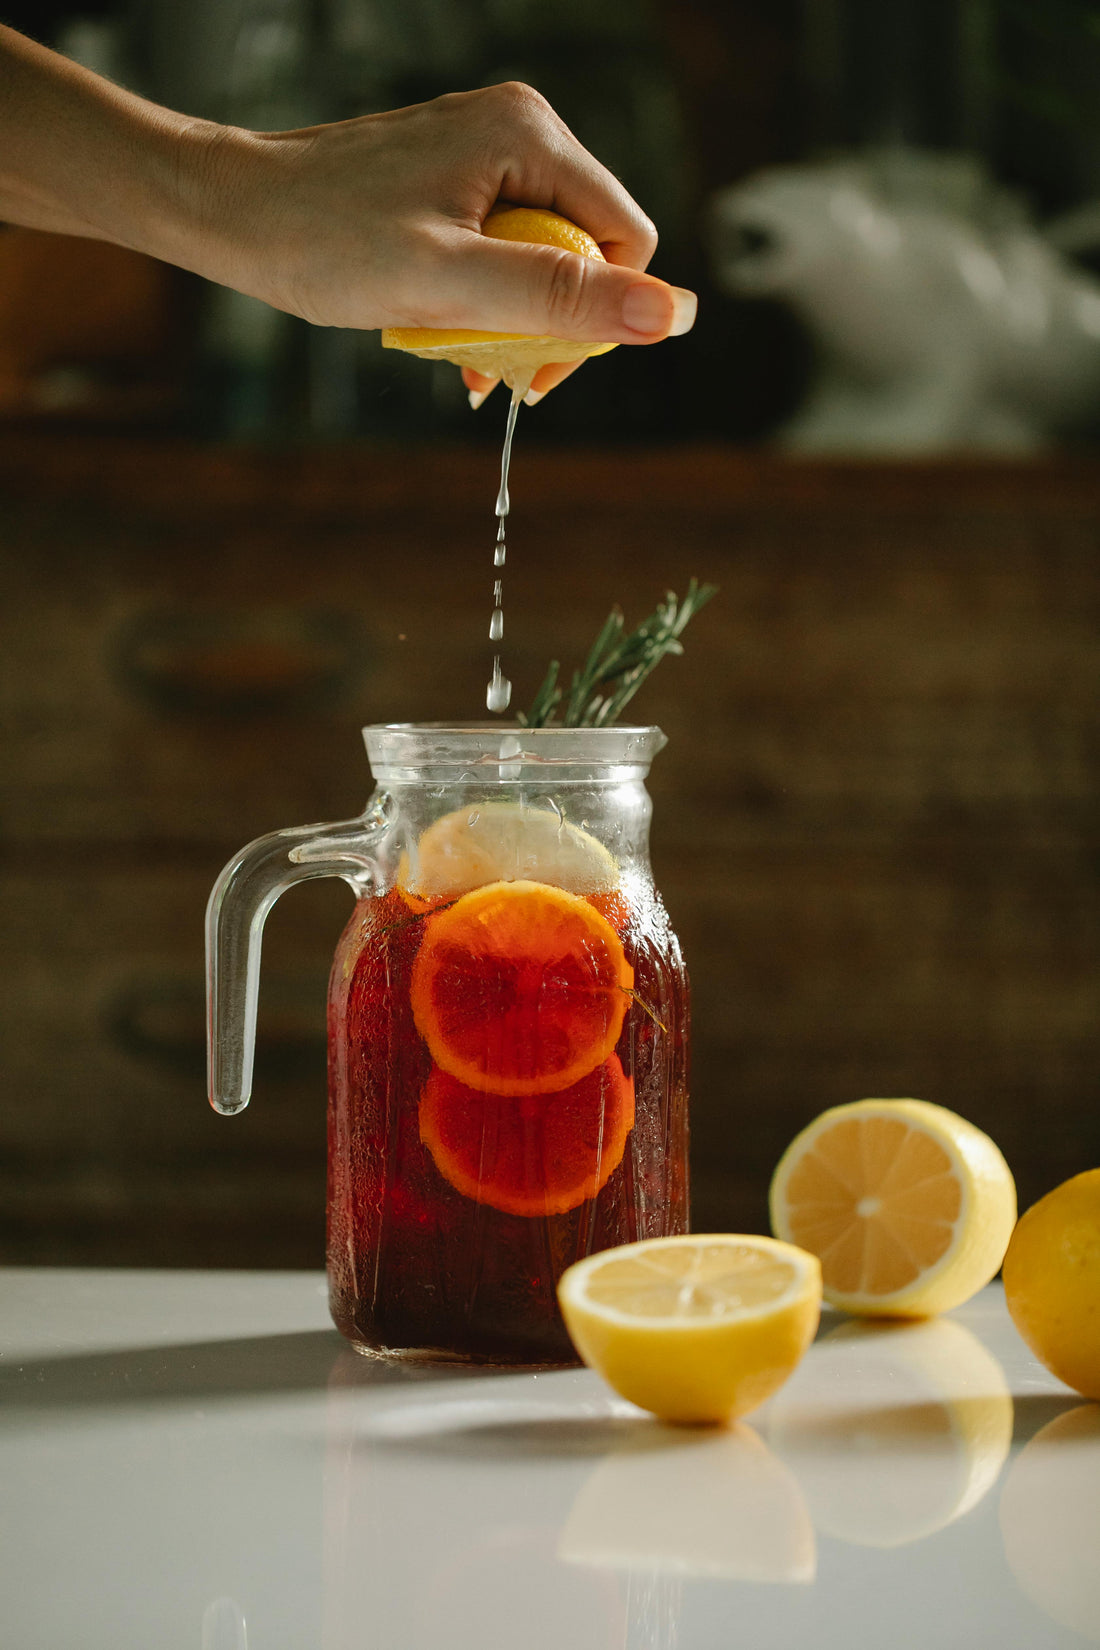 Beyond Quenching Thirst: The Health Secrets of Infused Lemonades